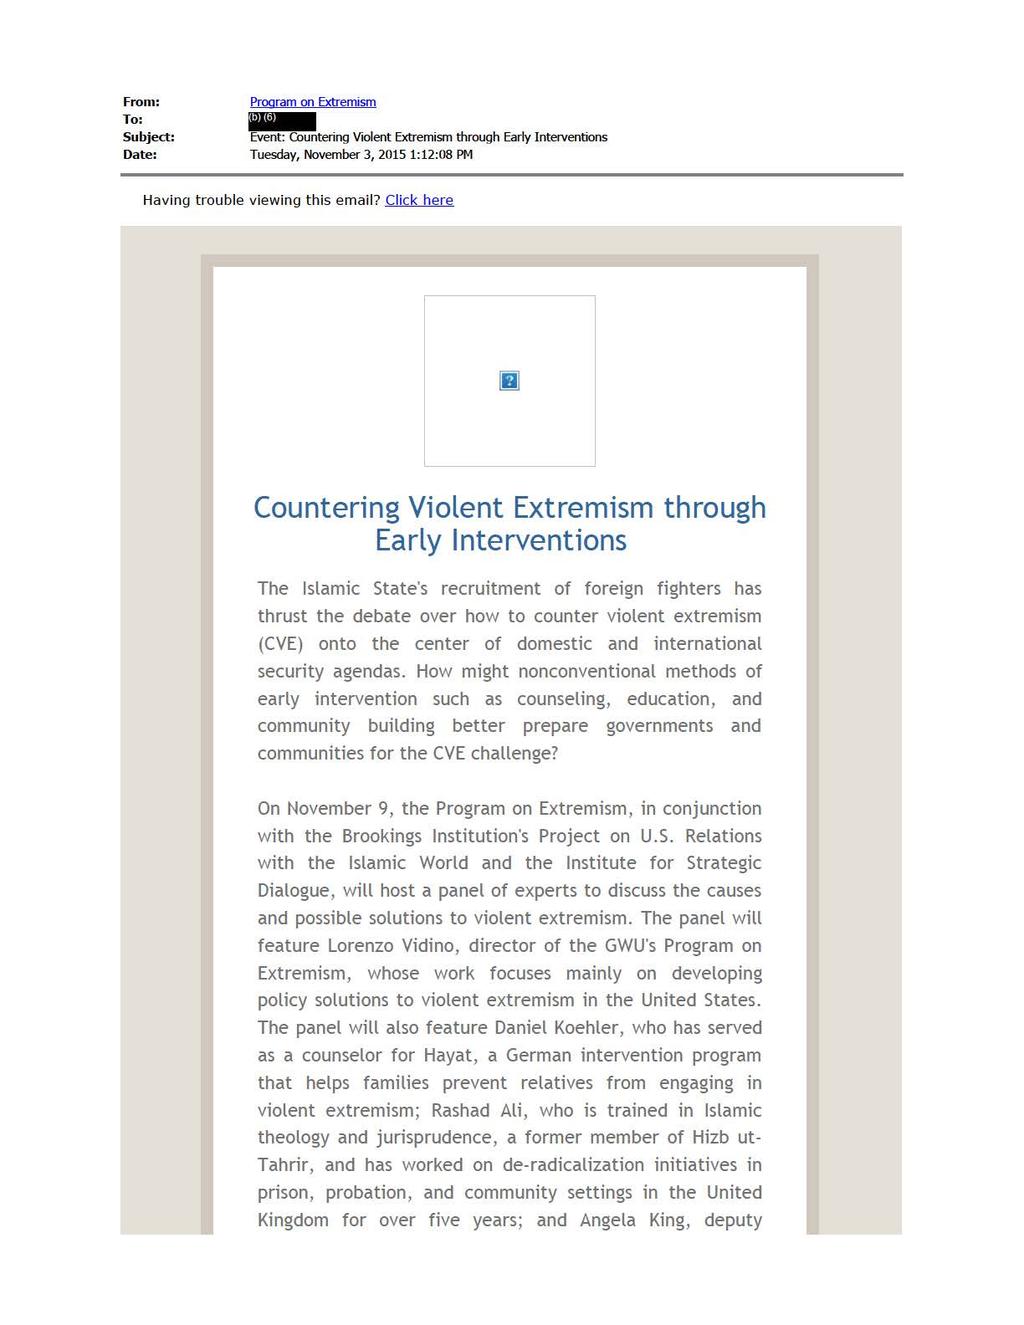 ... From: To: Subject: Date: Prooram on Extremism Event: Countering Violent Extremism through Early Interventions Tuesday, November 3, 2015 1:12:08 PM Having trouble viewing this email?